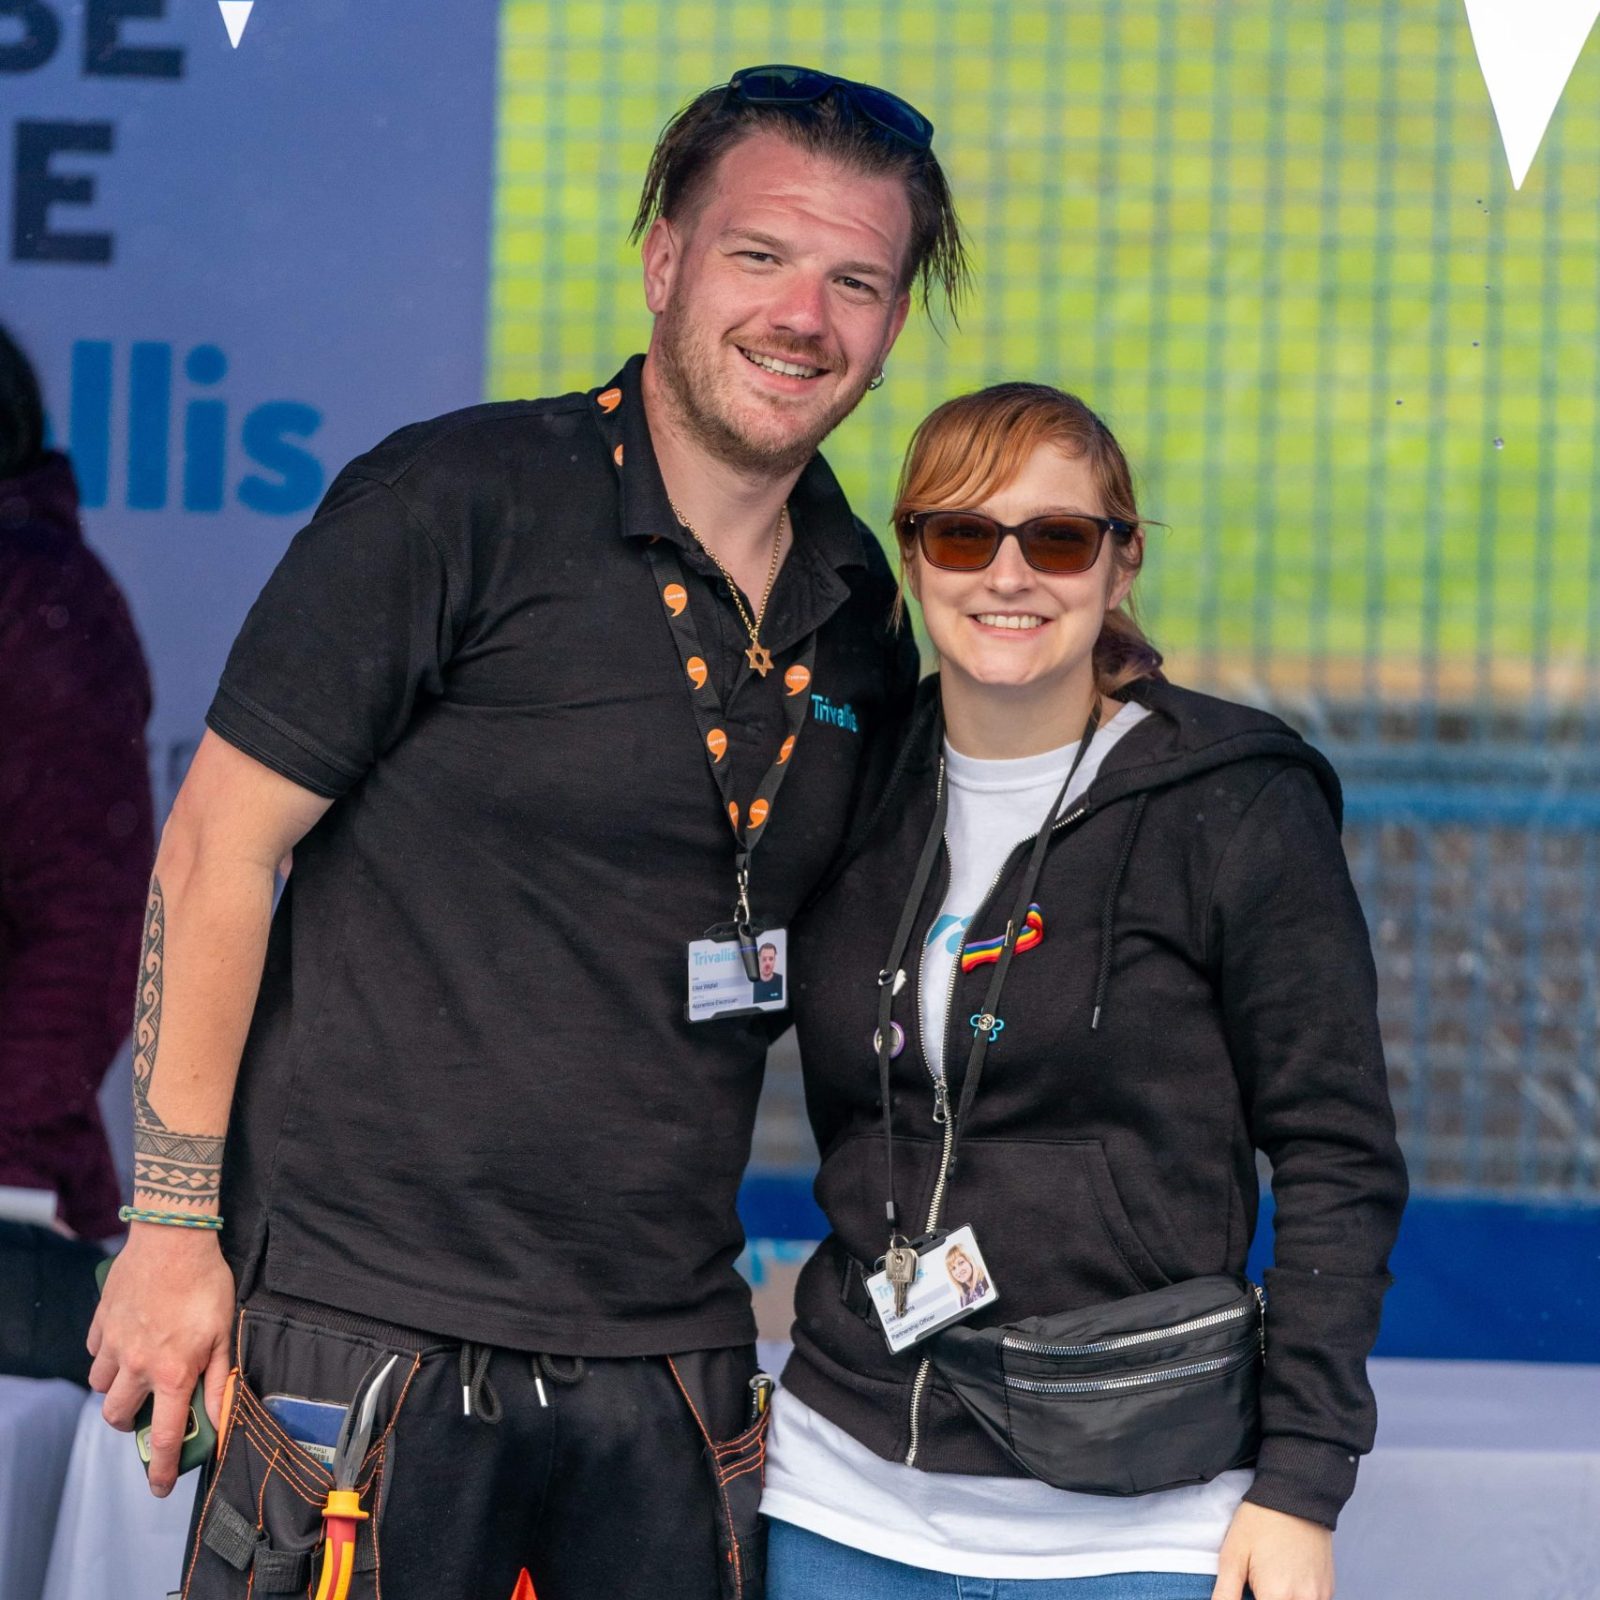 Trivallis Housing Landlord Wales Two individuals, a man and a woman, pose for a photo together, smiling. The man is wearing a black shirt with orange accents and a tool belt, while the woman is in a black hoodie